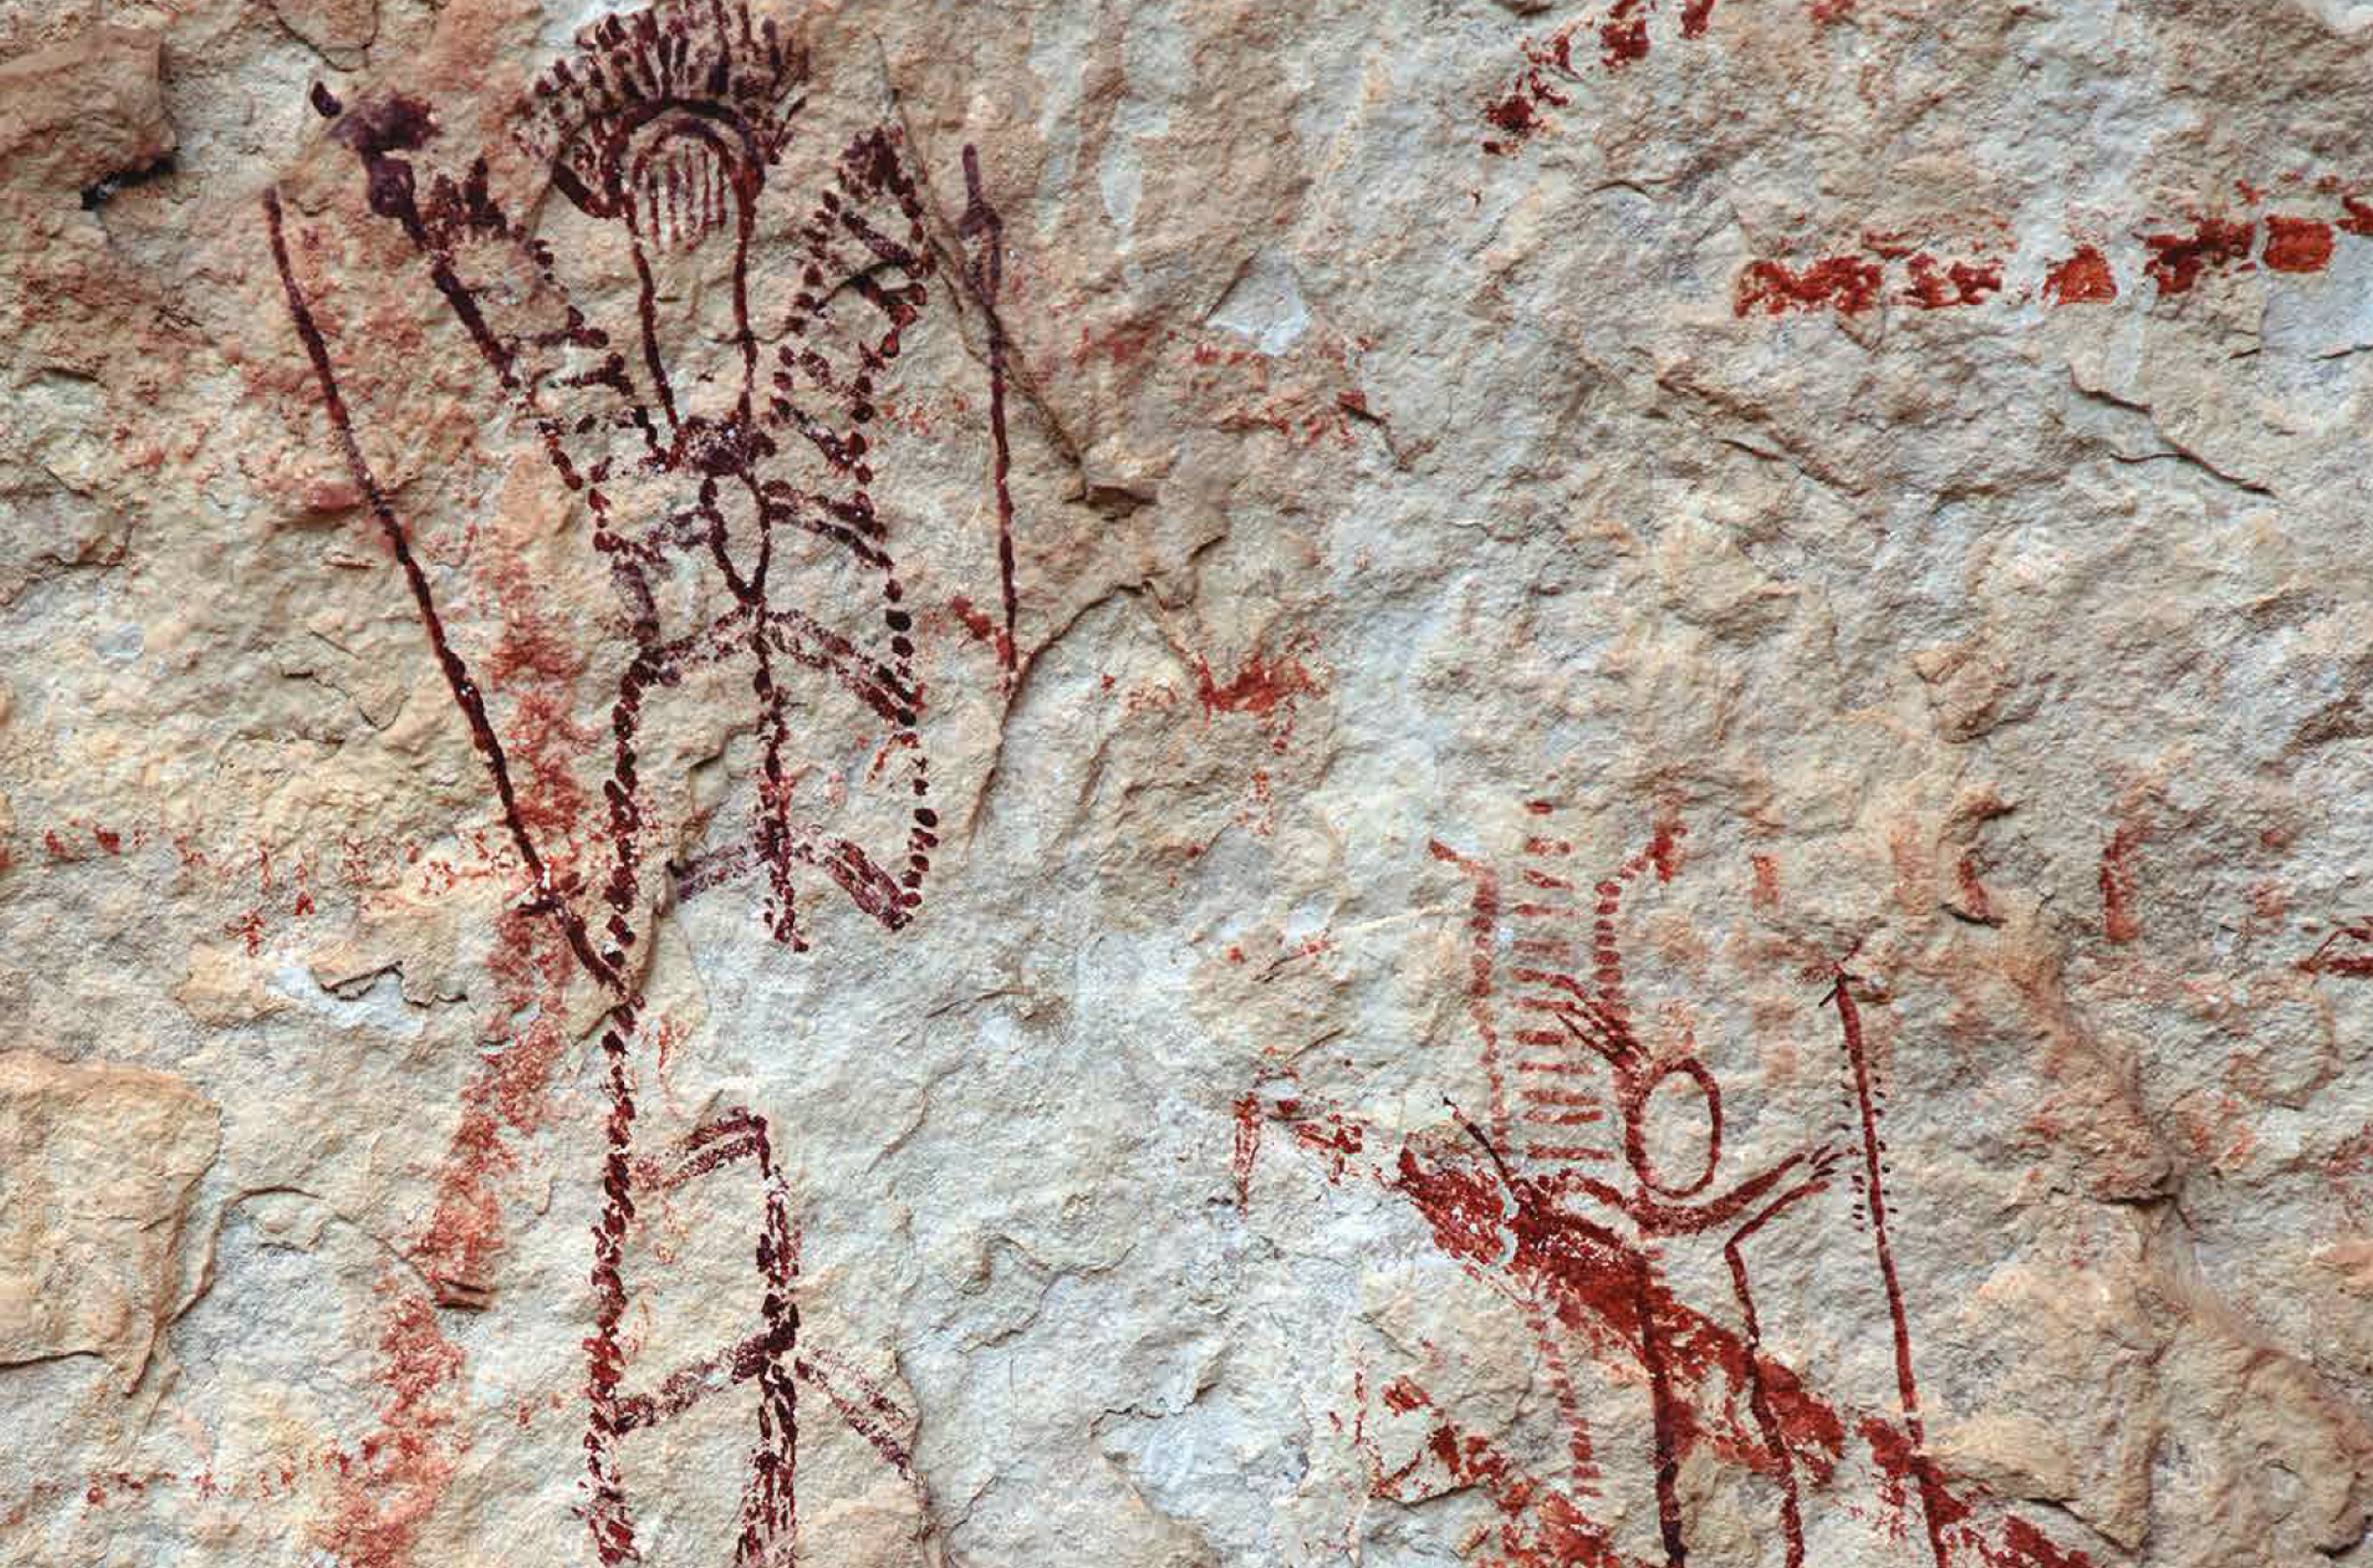 Artists used natural features in the rock to serve as the eyes and nose of the taller figure on the left